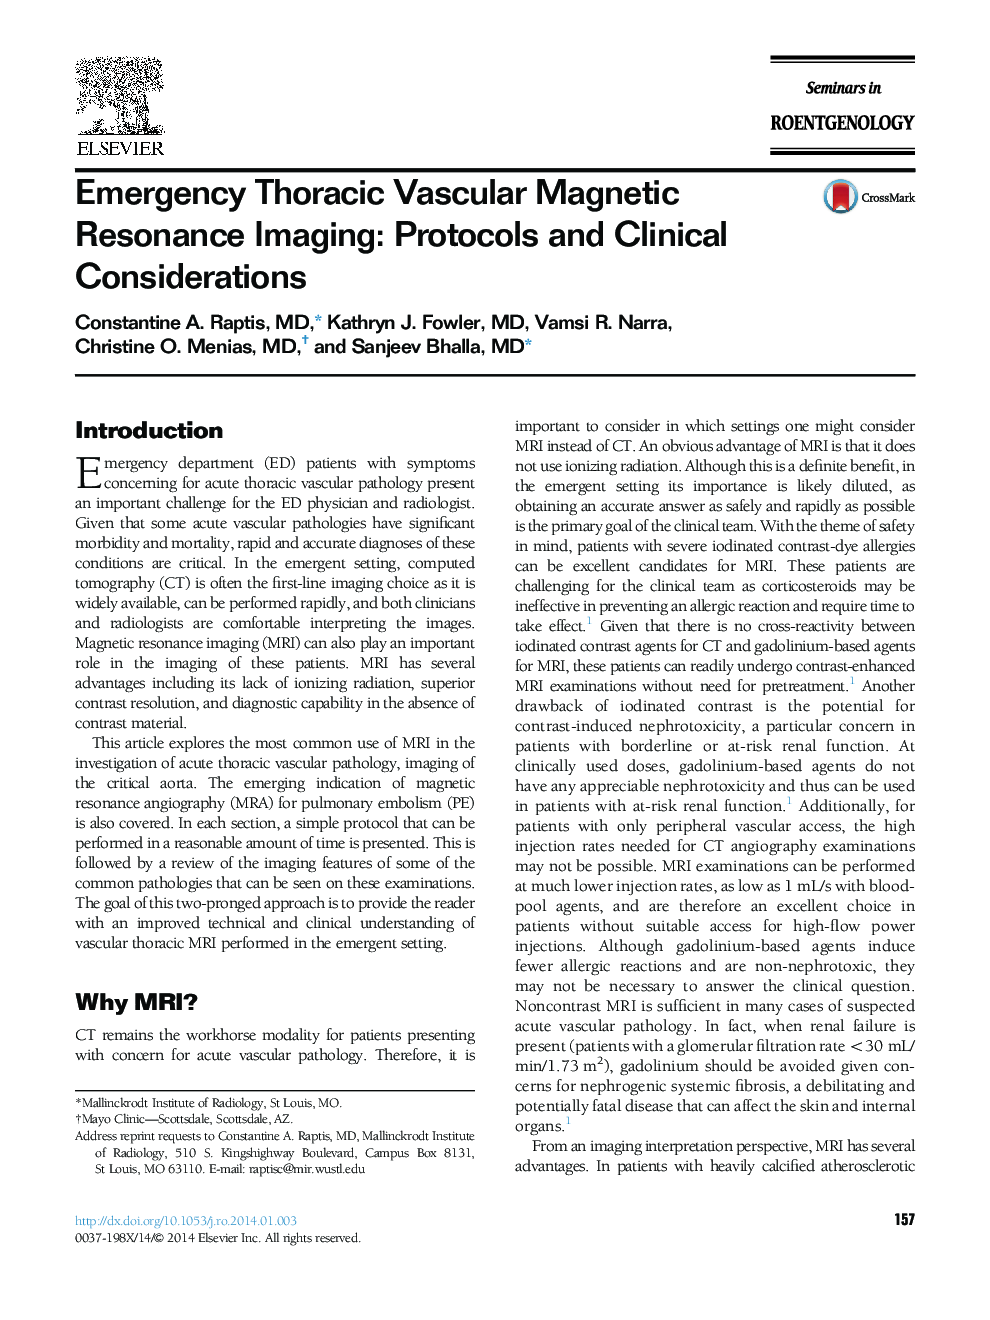 Emergency Thoracic Vascular Magnetic Resonance Imaging: Protocols and Clinical Considerations